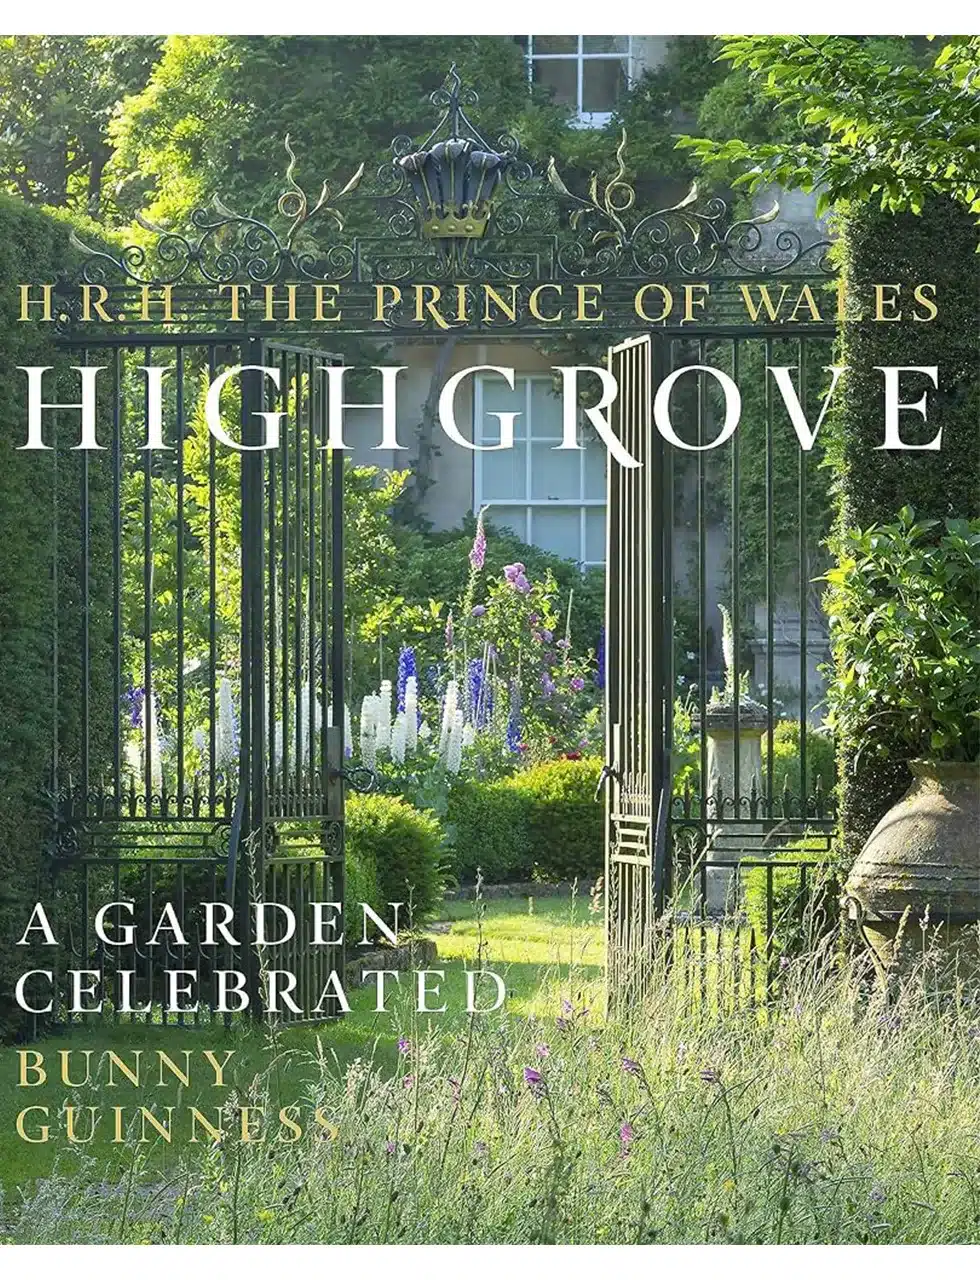 The garden at highgrove by King Charles is a perfect example of sustainability and garden design